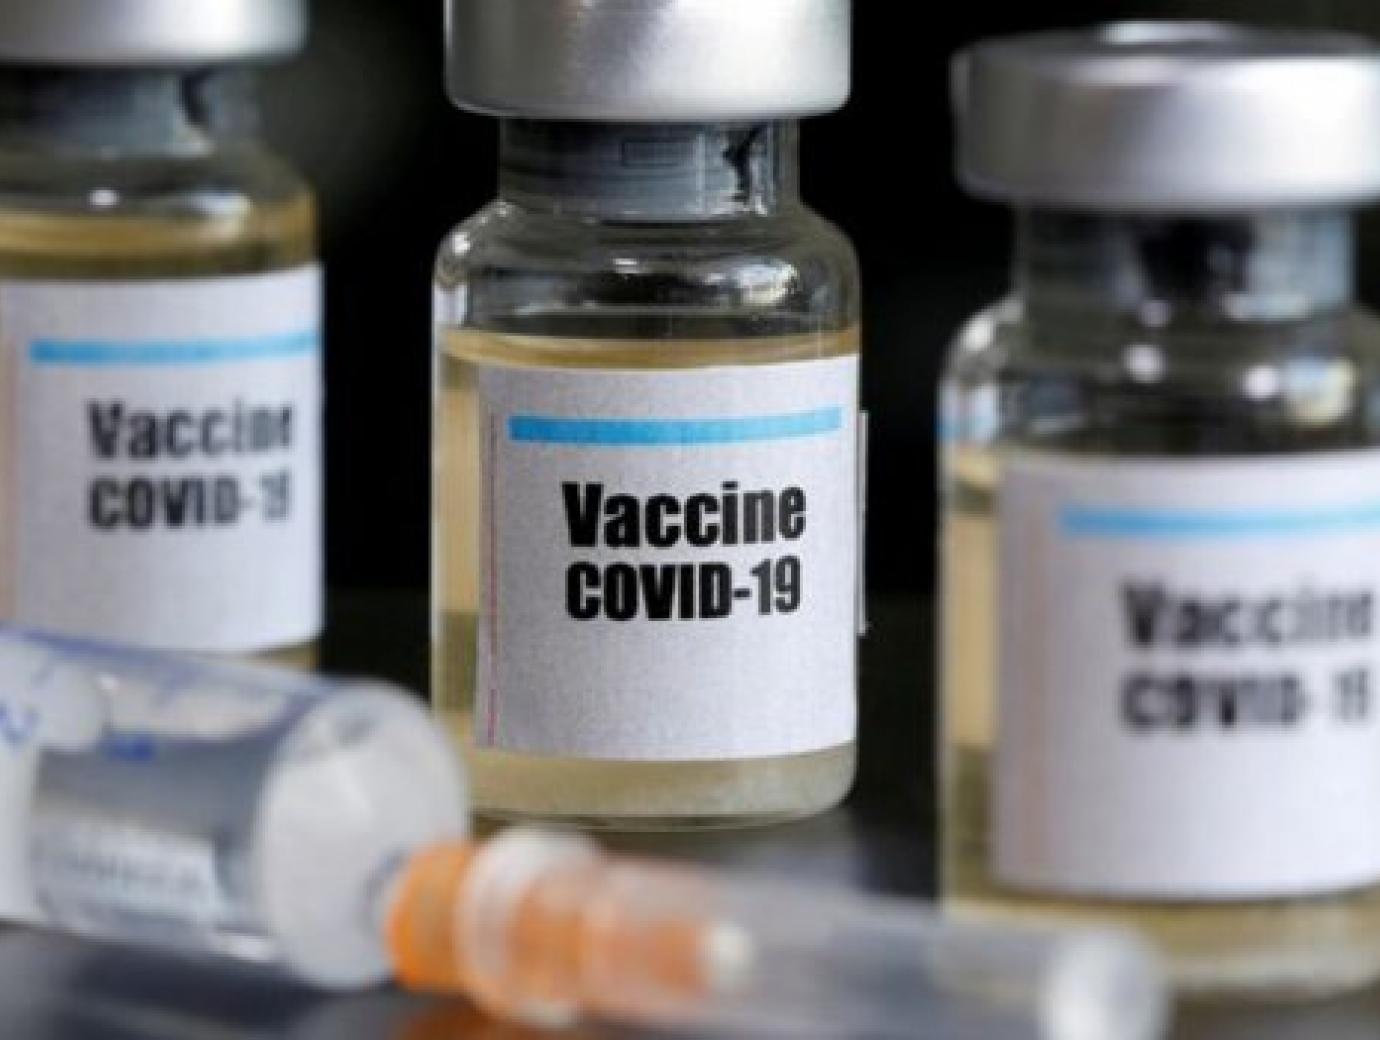 picture of covid-19 vaccines